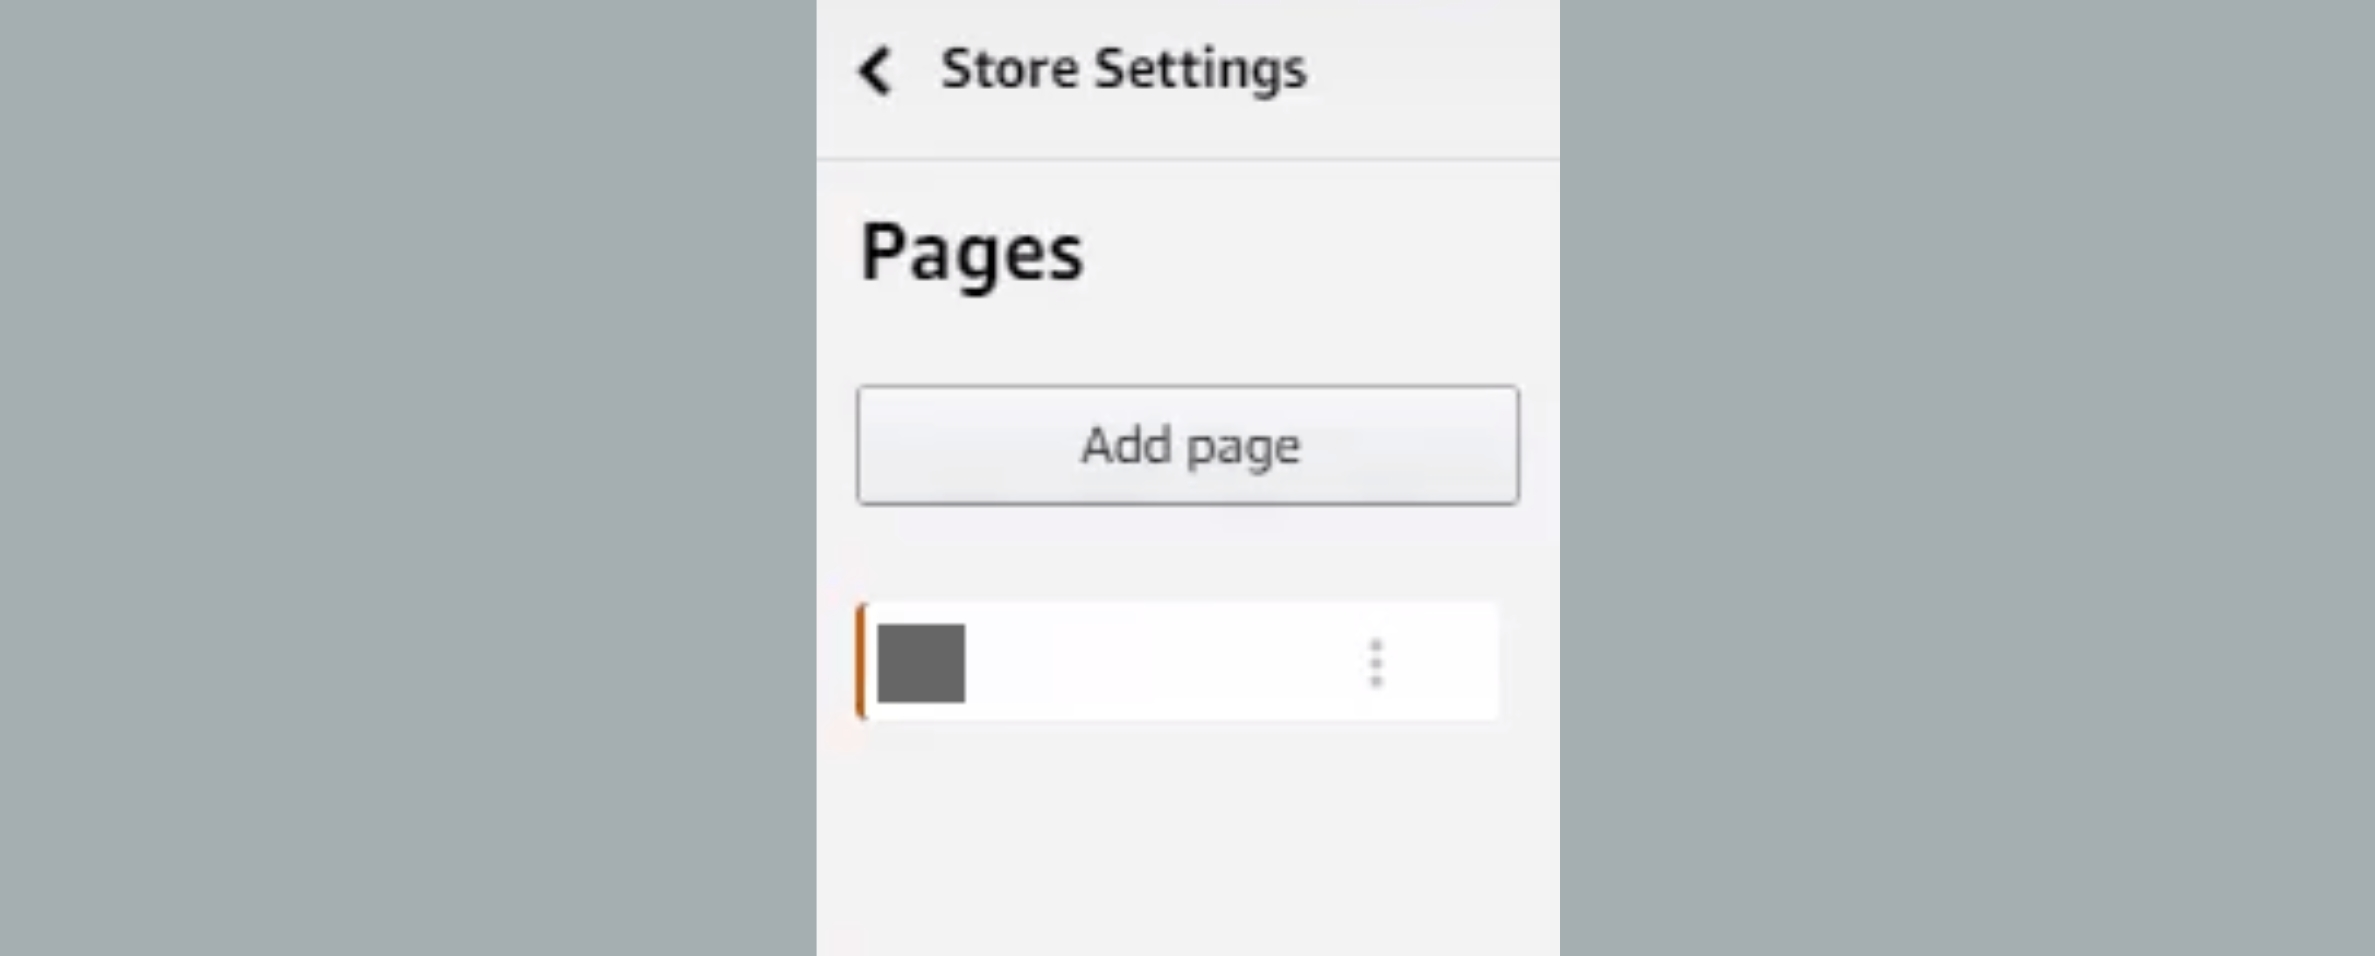 Add pages to your Amazon Storefront. 